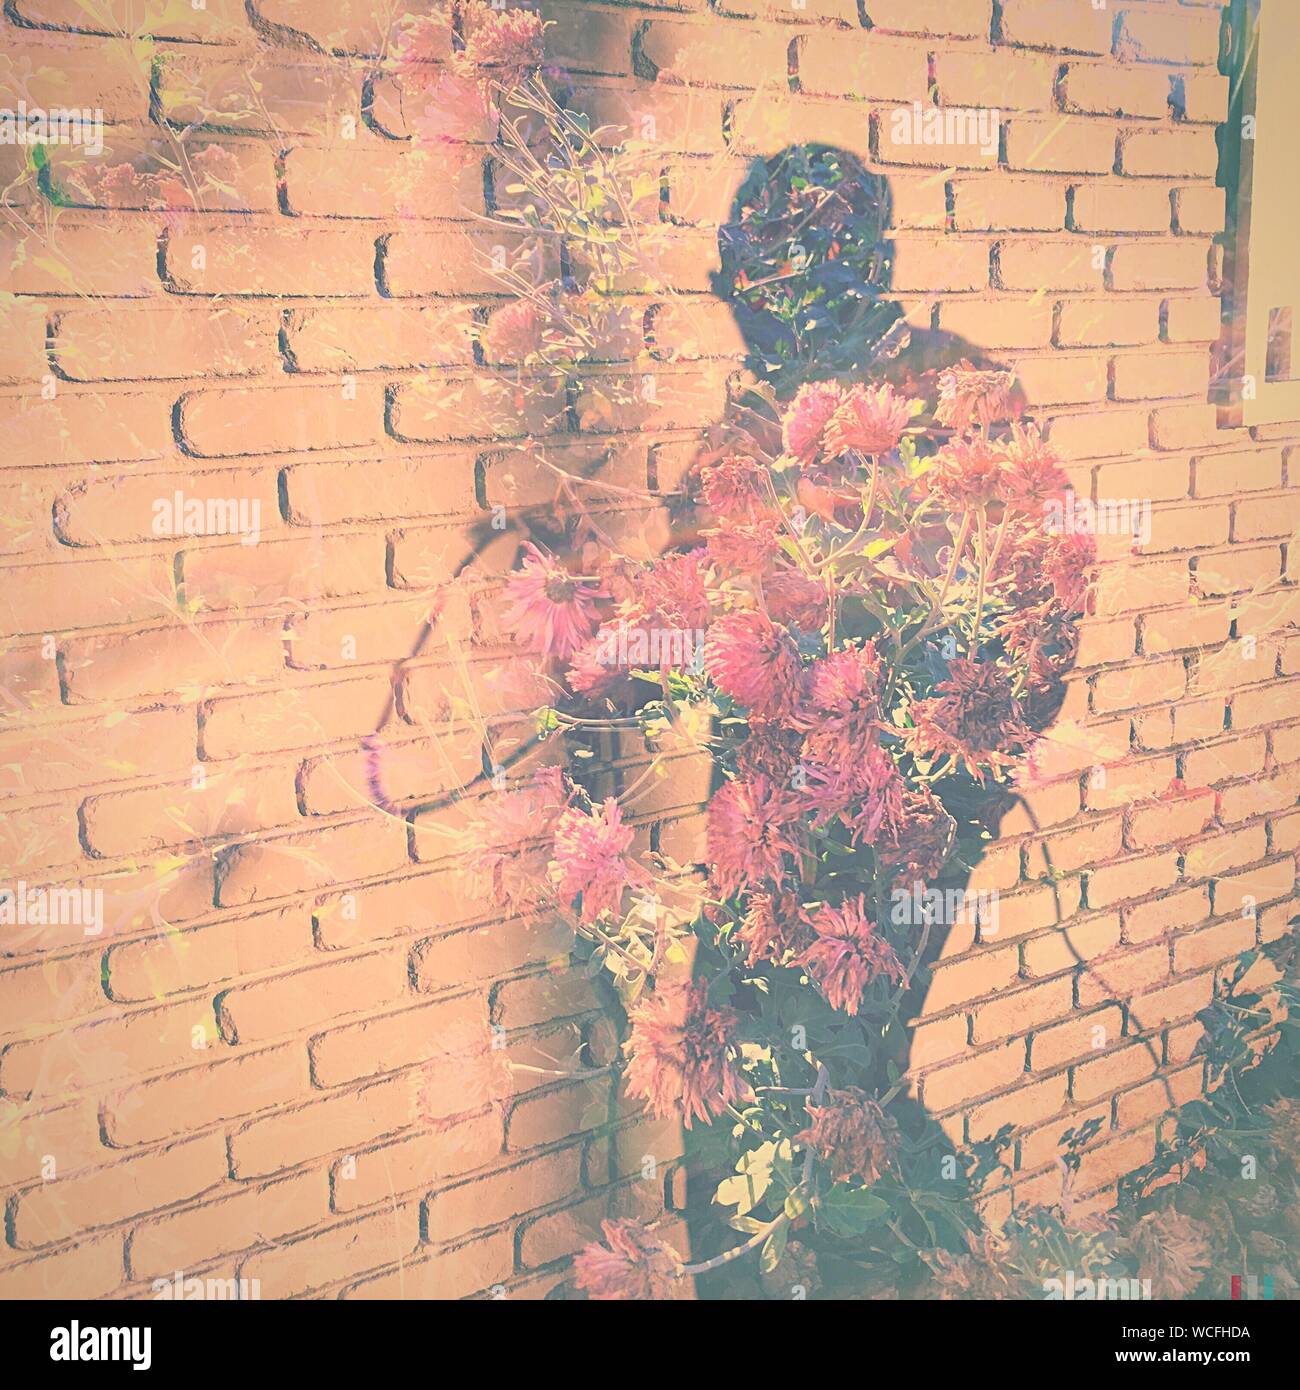 Multiple Exposure Image Of Man With Flowers Walking By Brick Wall Stock Photo